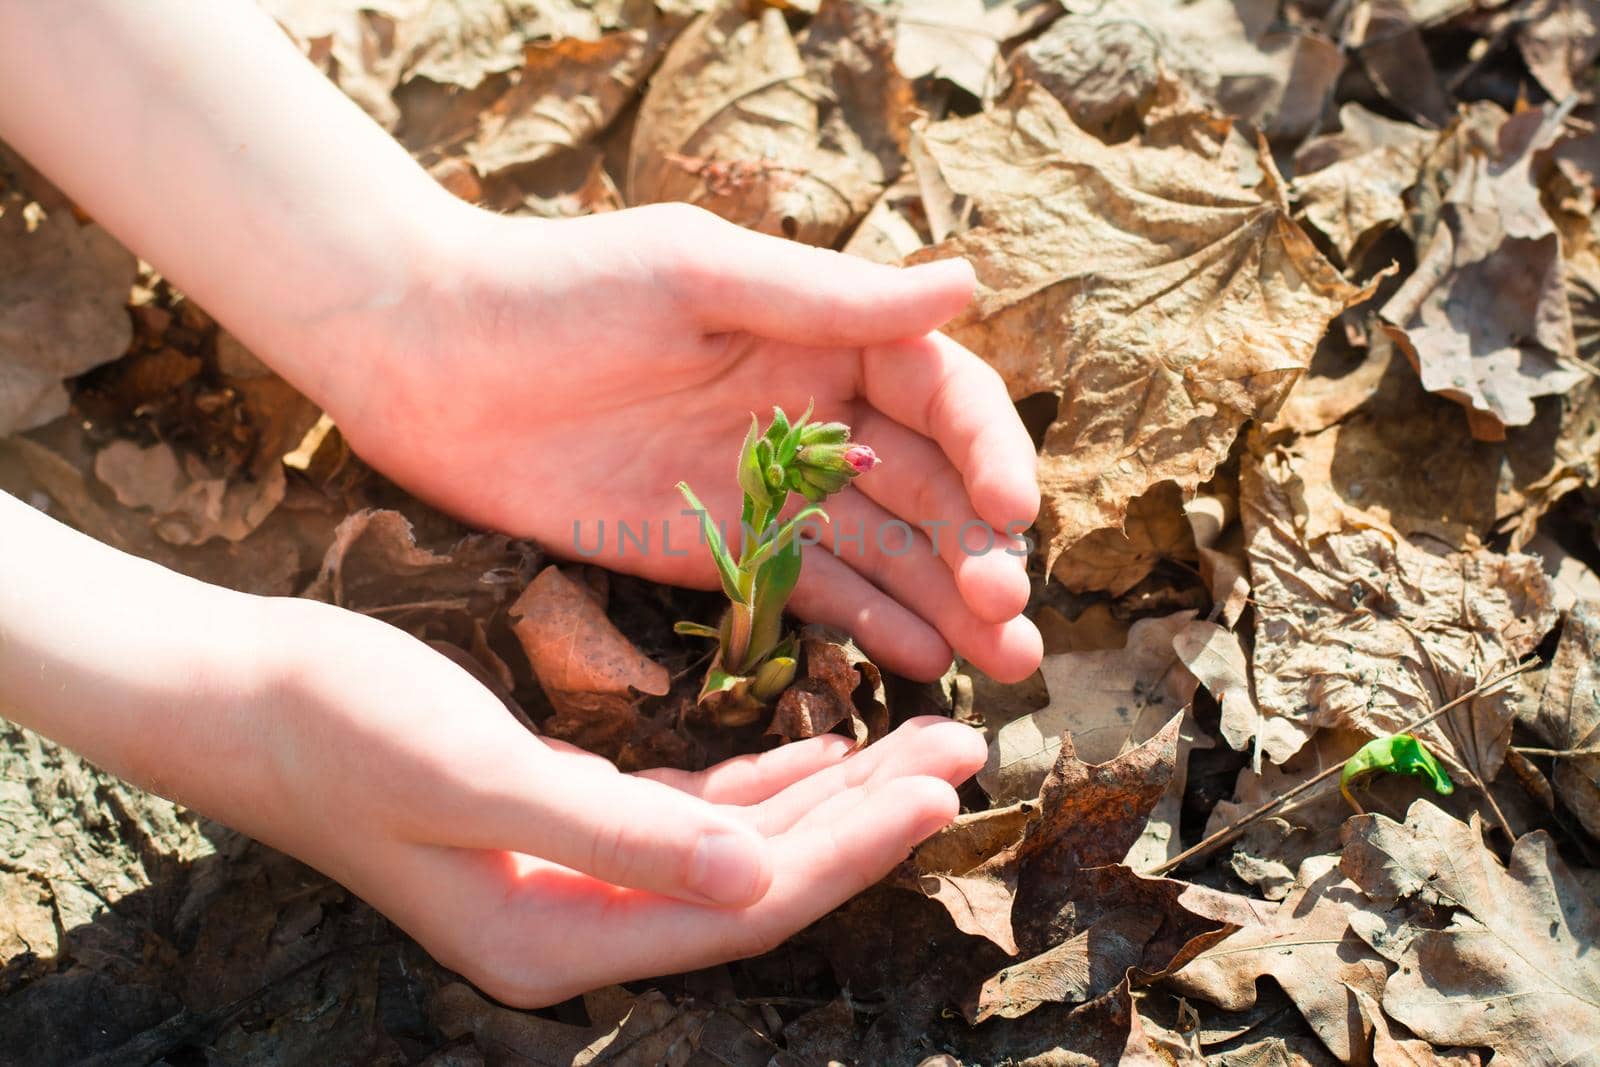 Children's hands surrounded with care a young sprout with a flower bud on the ground in the forest among last year's leaves in spring by Aleruana